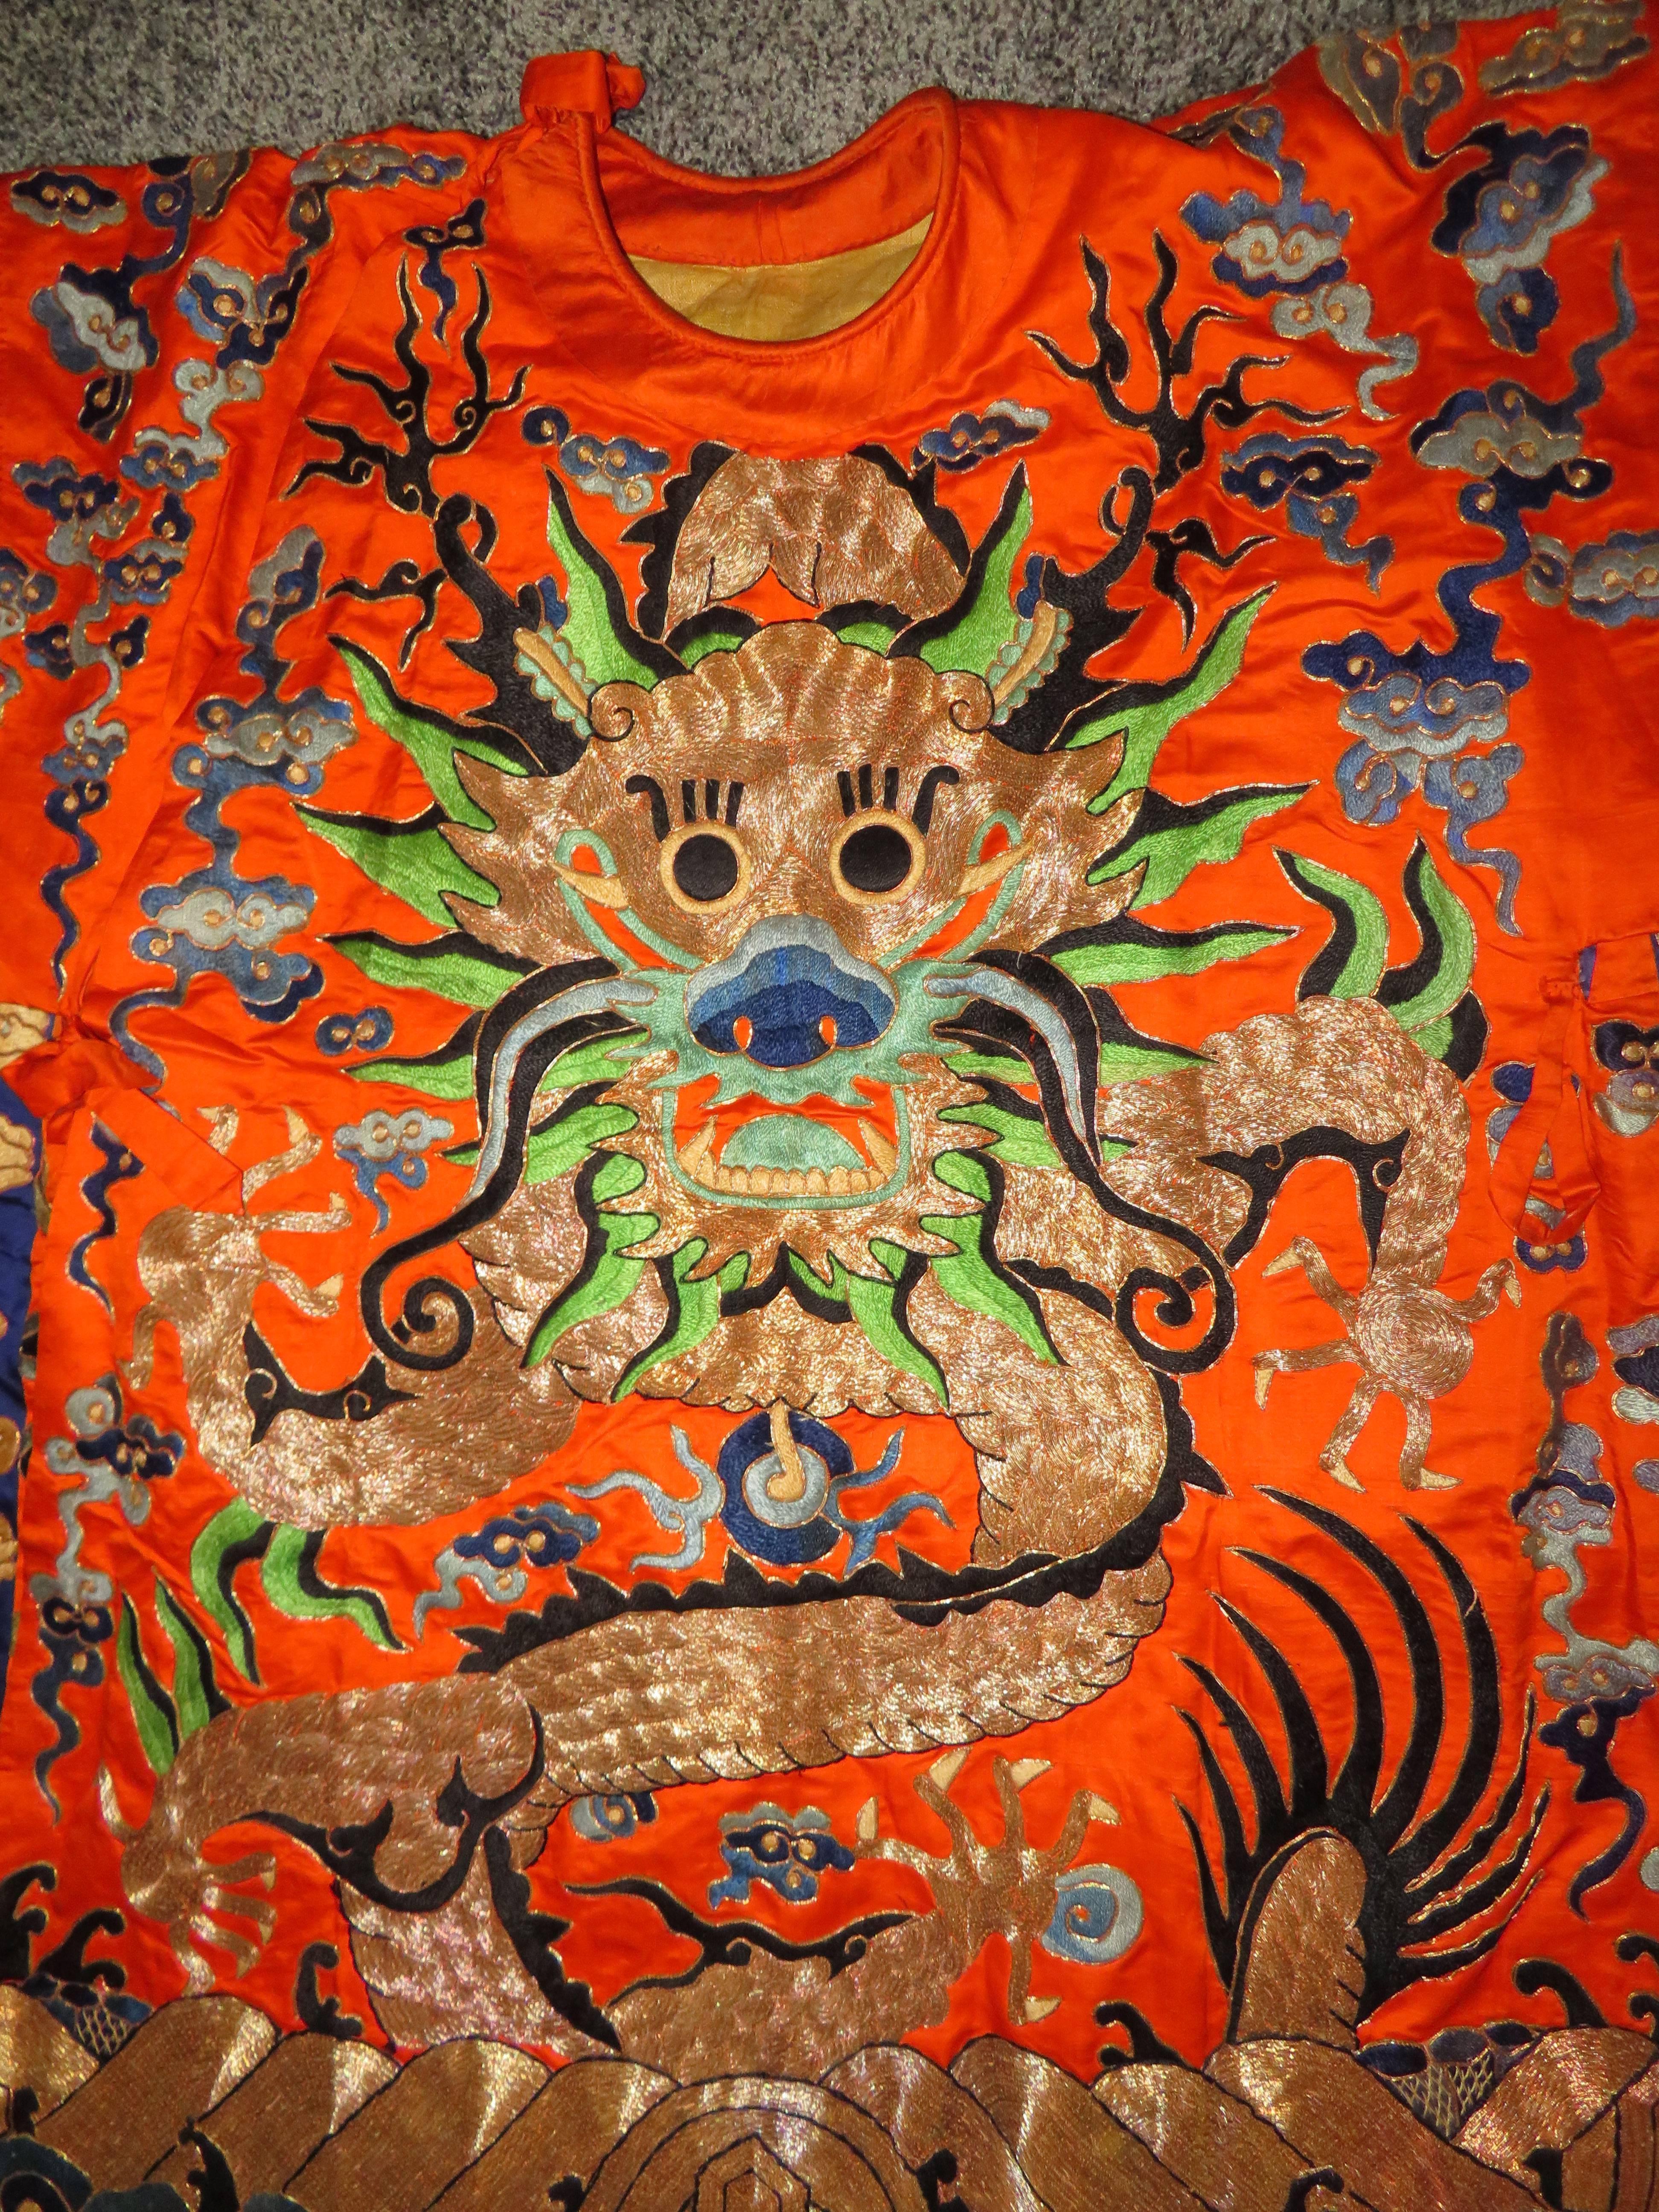 Stunning Chinese gold thread embroidered dragon ceremonial kimono robe, circa early 20th century. We just love the animated gold dragon embroidered on both sides along with the Hermes orange silk background.